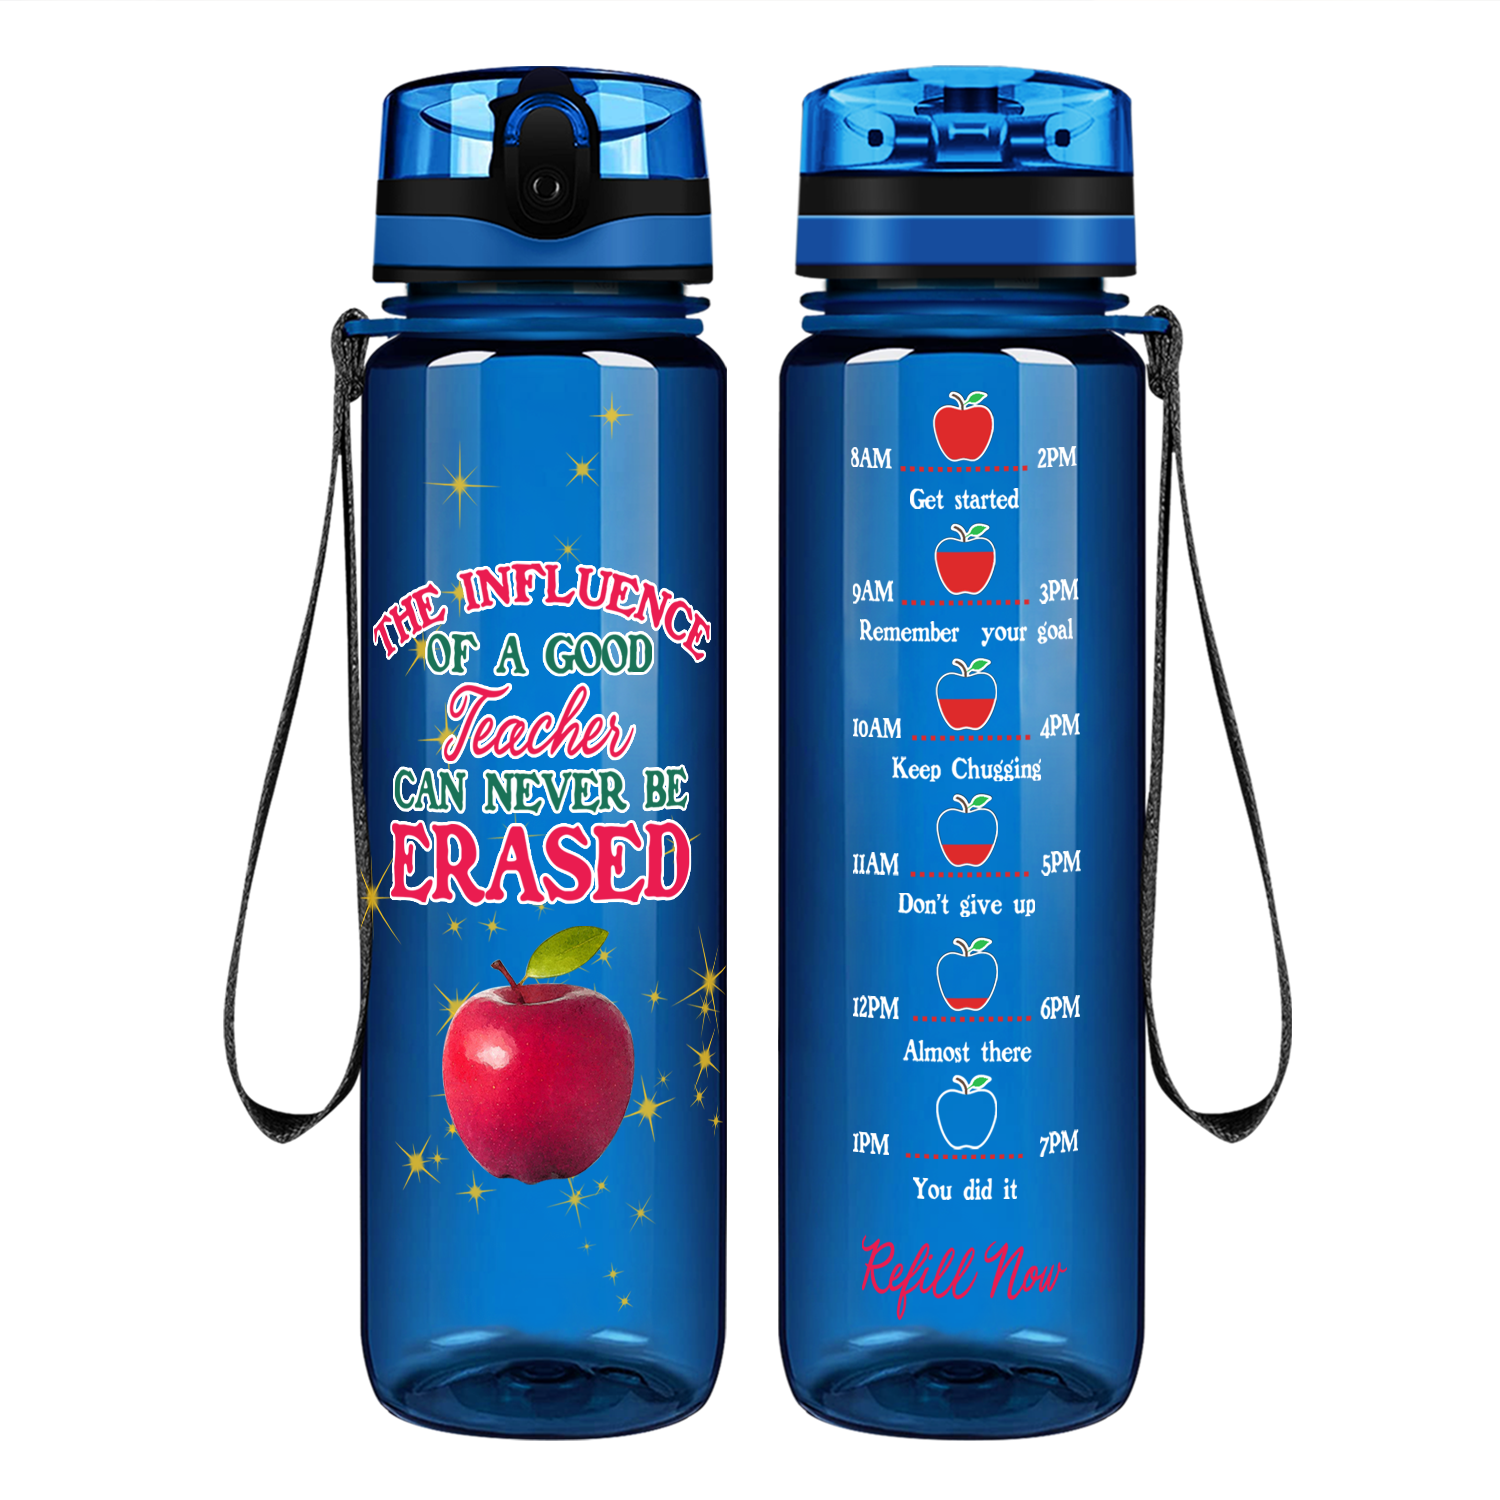 Teacher Can Never be Erased on 32 oz Motivational Tracking Water Bottle